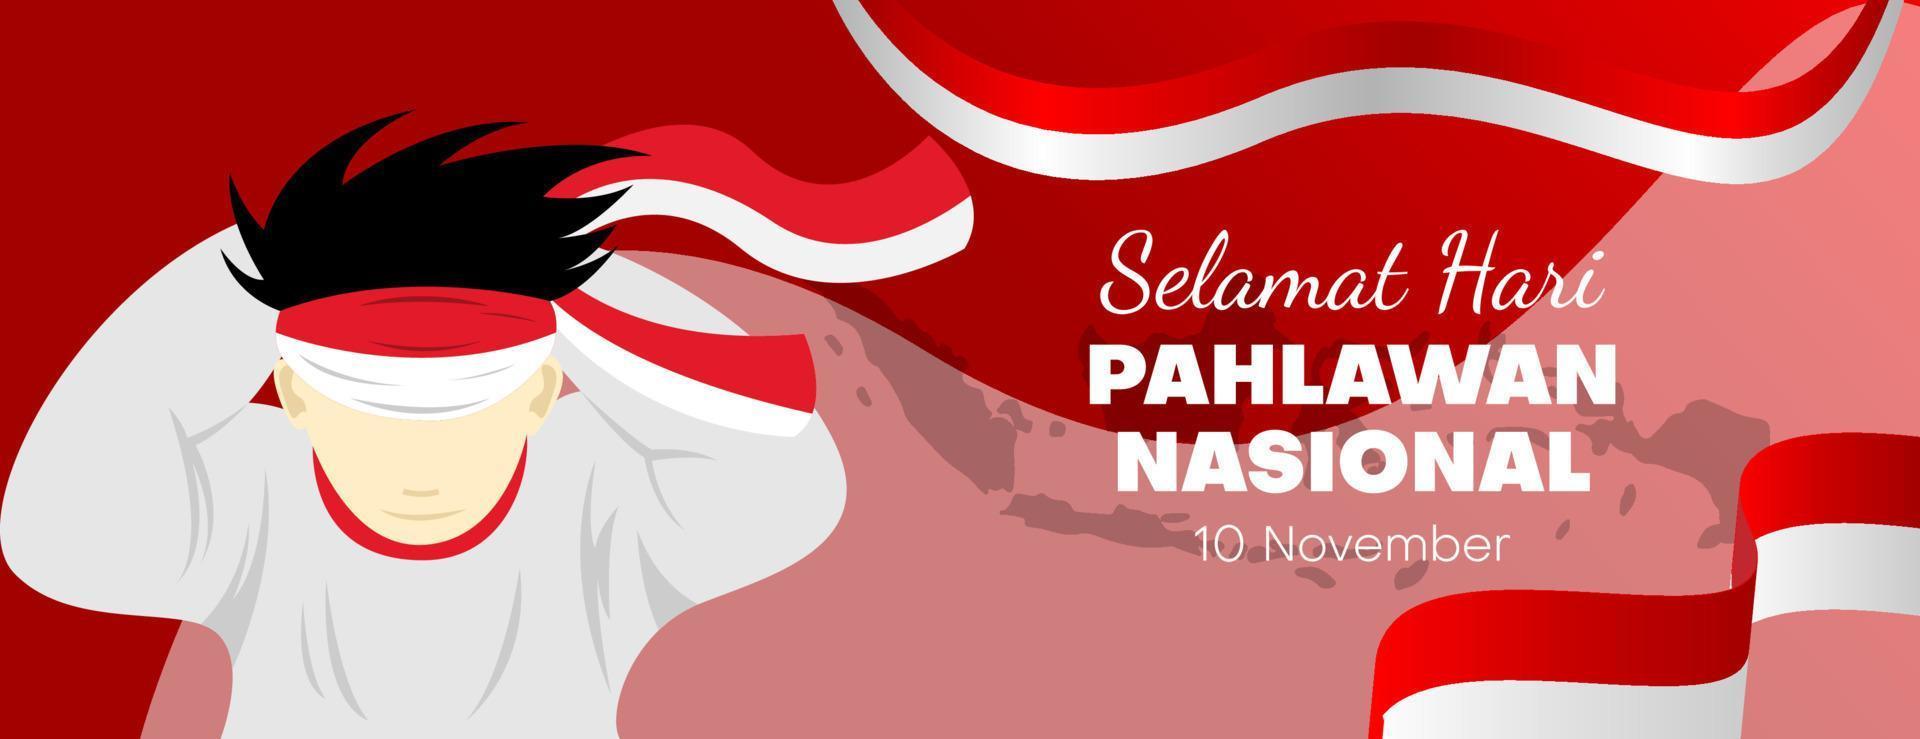 hari pahlawan nasional or indonesian hero's day background for banner, poster , greeting card or website with the illustration of a person tying his head with a red and white cloth vector